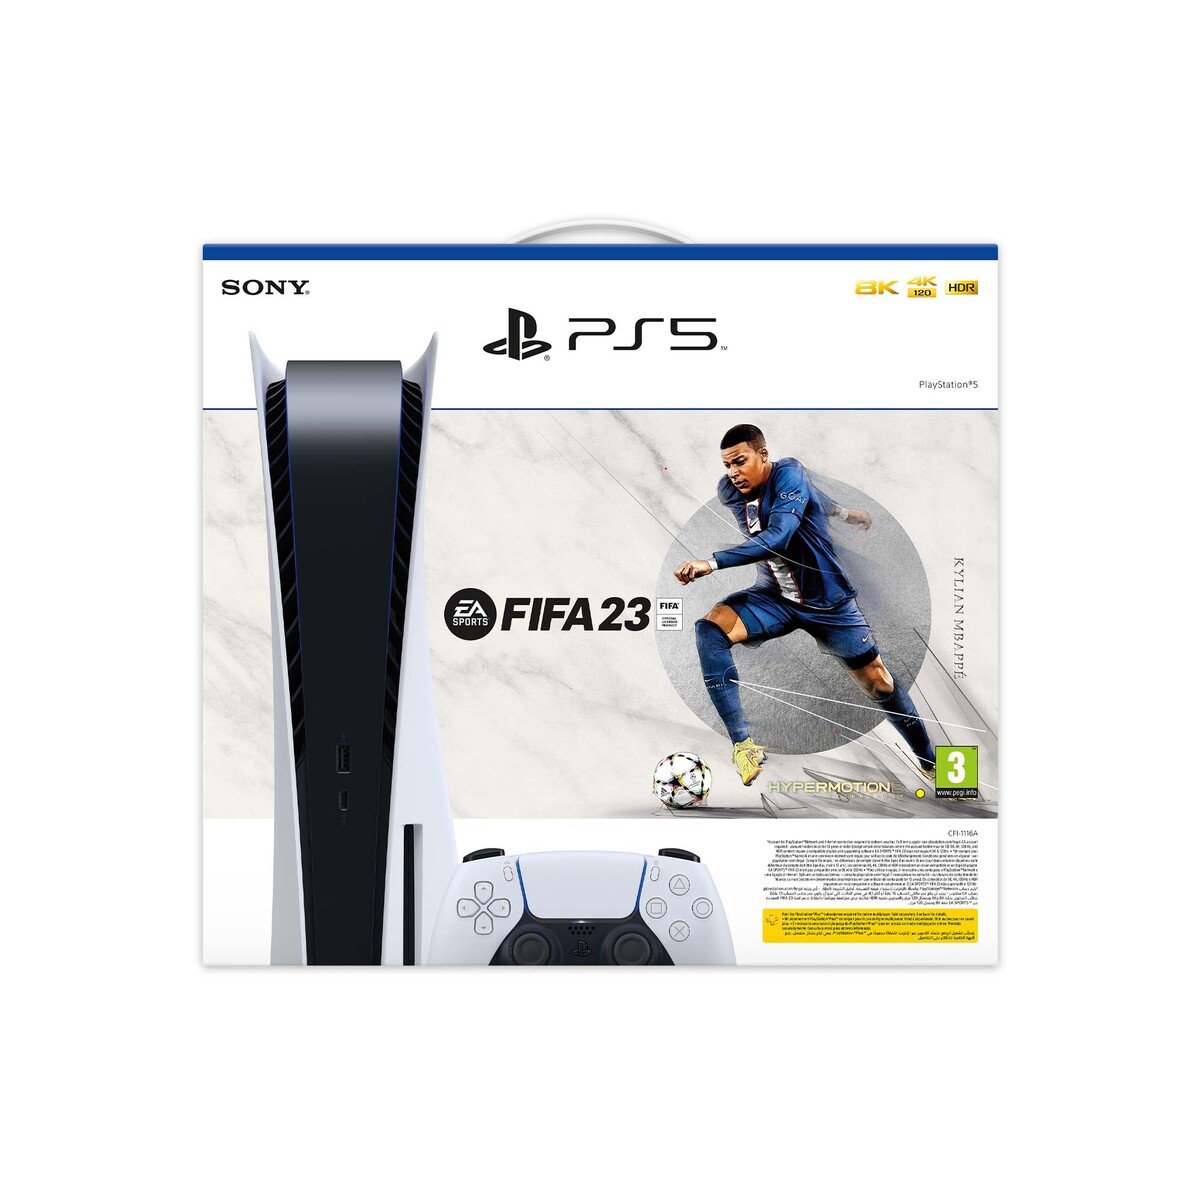 Sony PS5 Console+FIFA 23 full game voucher+FIFA 23 Ultimate Team™ voucher